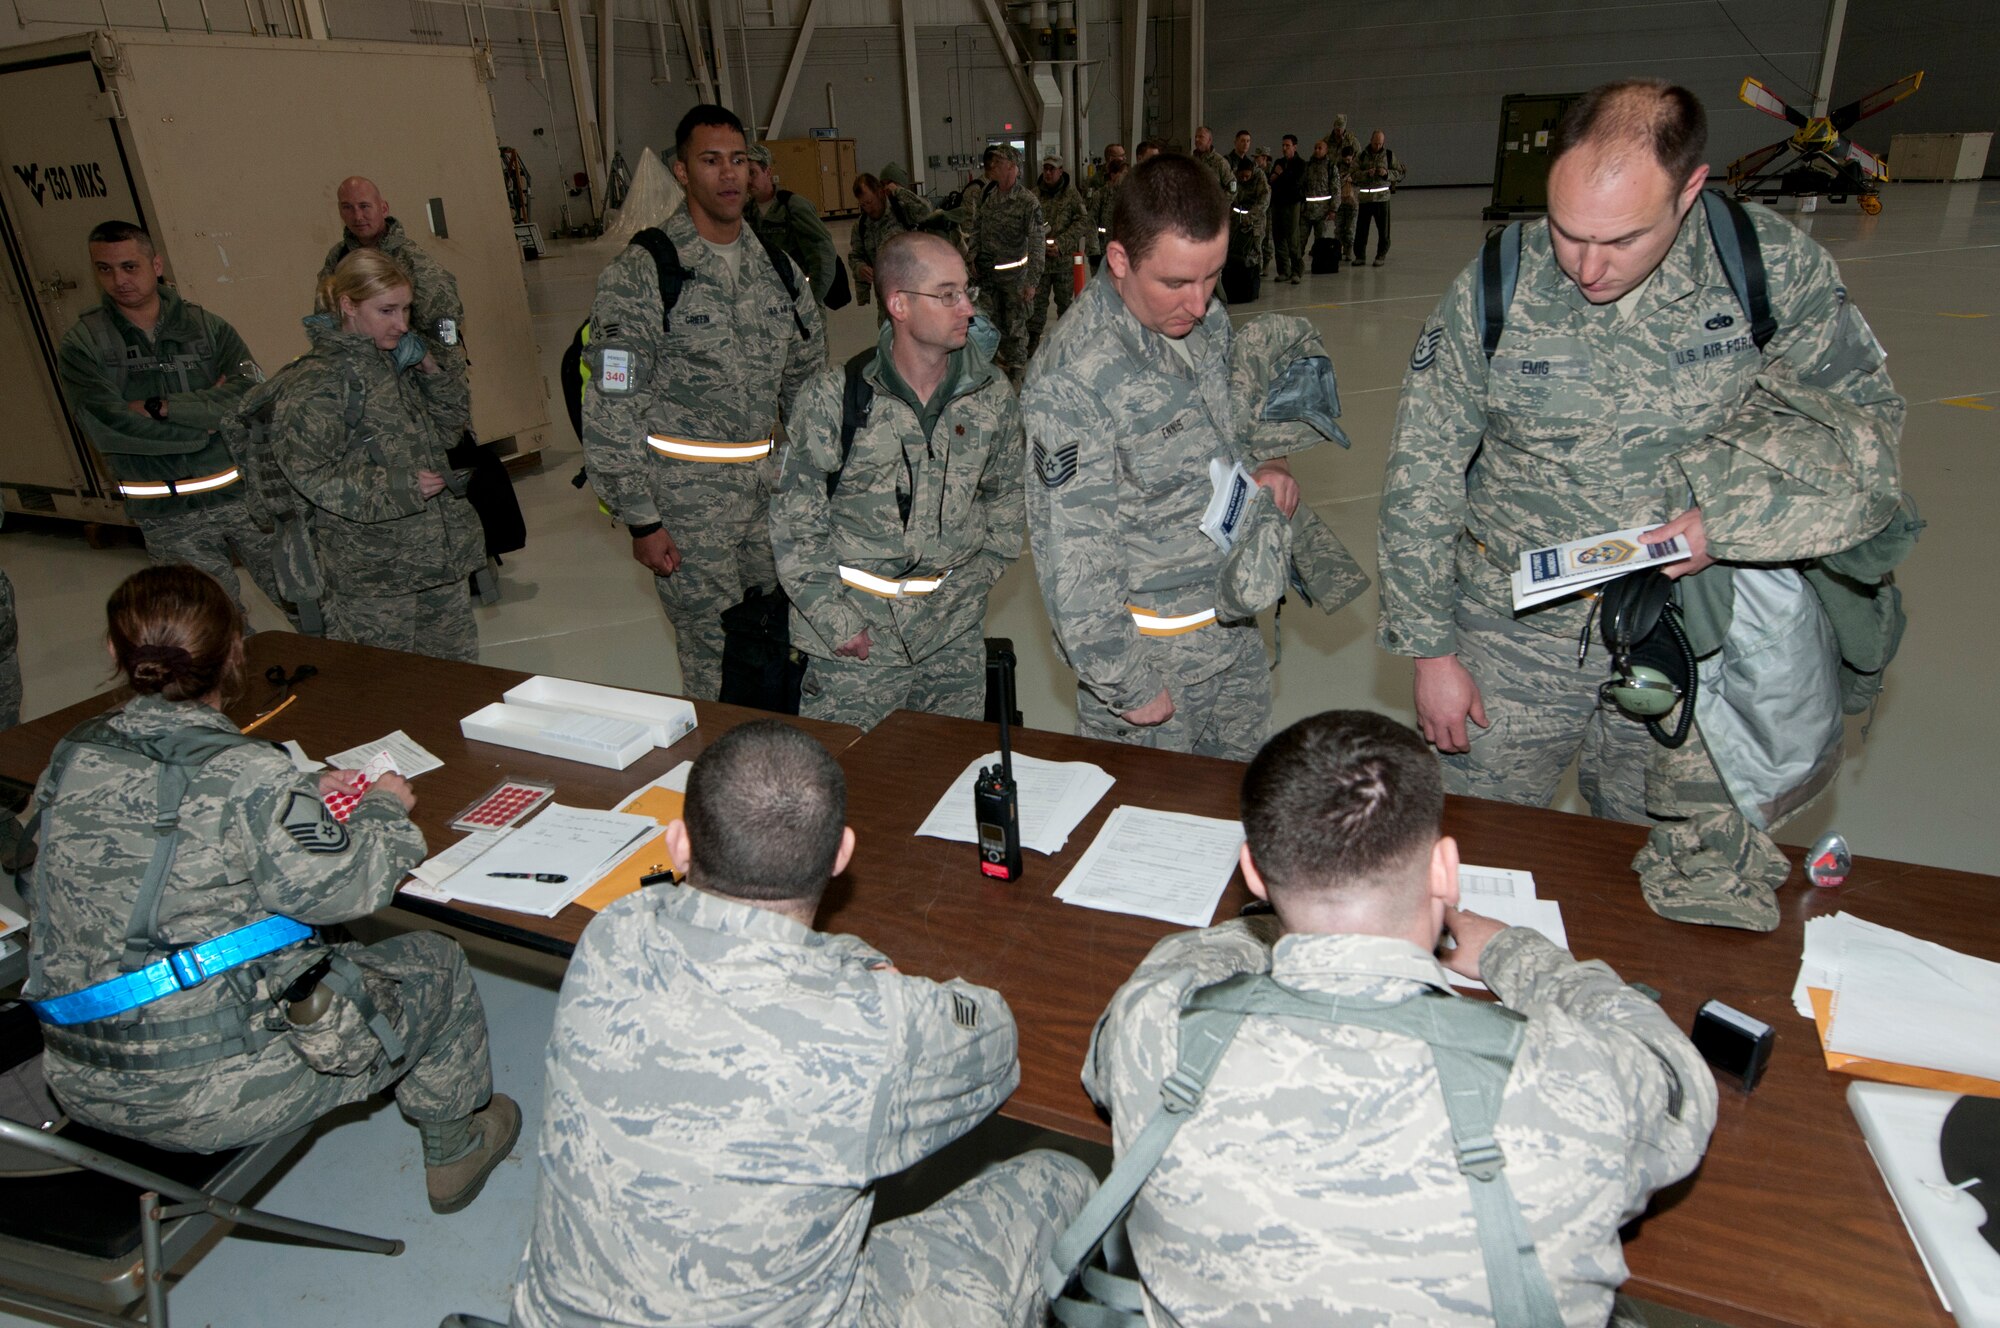 Members of the153rd Airlift Wing in-process during an Operational Readiness Exercise, after arriving at the Mississippi Air National Guard's Combat Readiness Training Center Gulfport in Gulfport, Miss. The 134th Air Expeditionary Wing is comprised of four units: the 153rd Airlift Wing, the 130th Airlift Wing, the 375th Air Mobility Wing and the 11th Wing. The exercise assesses the abilities of the individual units to deploy forces, quickly respond and recover assets during a weeklong exercise conducted and graded by an Exercise Evaluation Team. (U.S. Air Force Photo by Tech. Sgt. Bryan G. Stevens/Released)